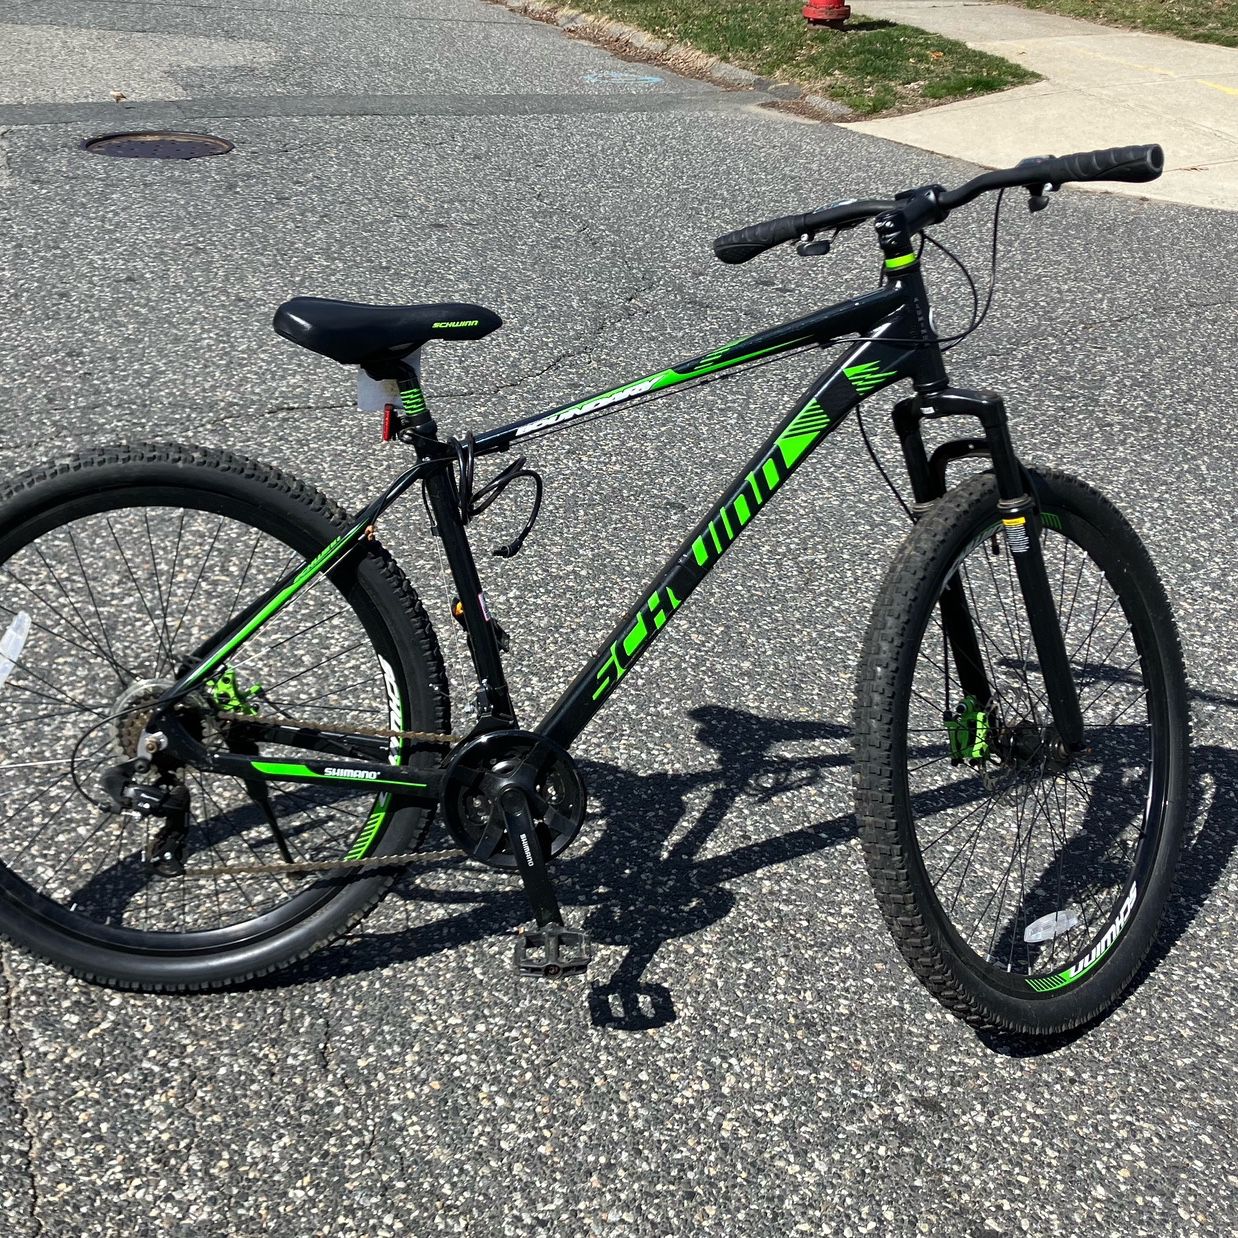  29" Men's Boundary Mountain Bike w/ Front Suspension and Dual Disc Brakes NEED GONE